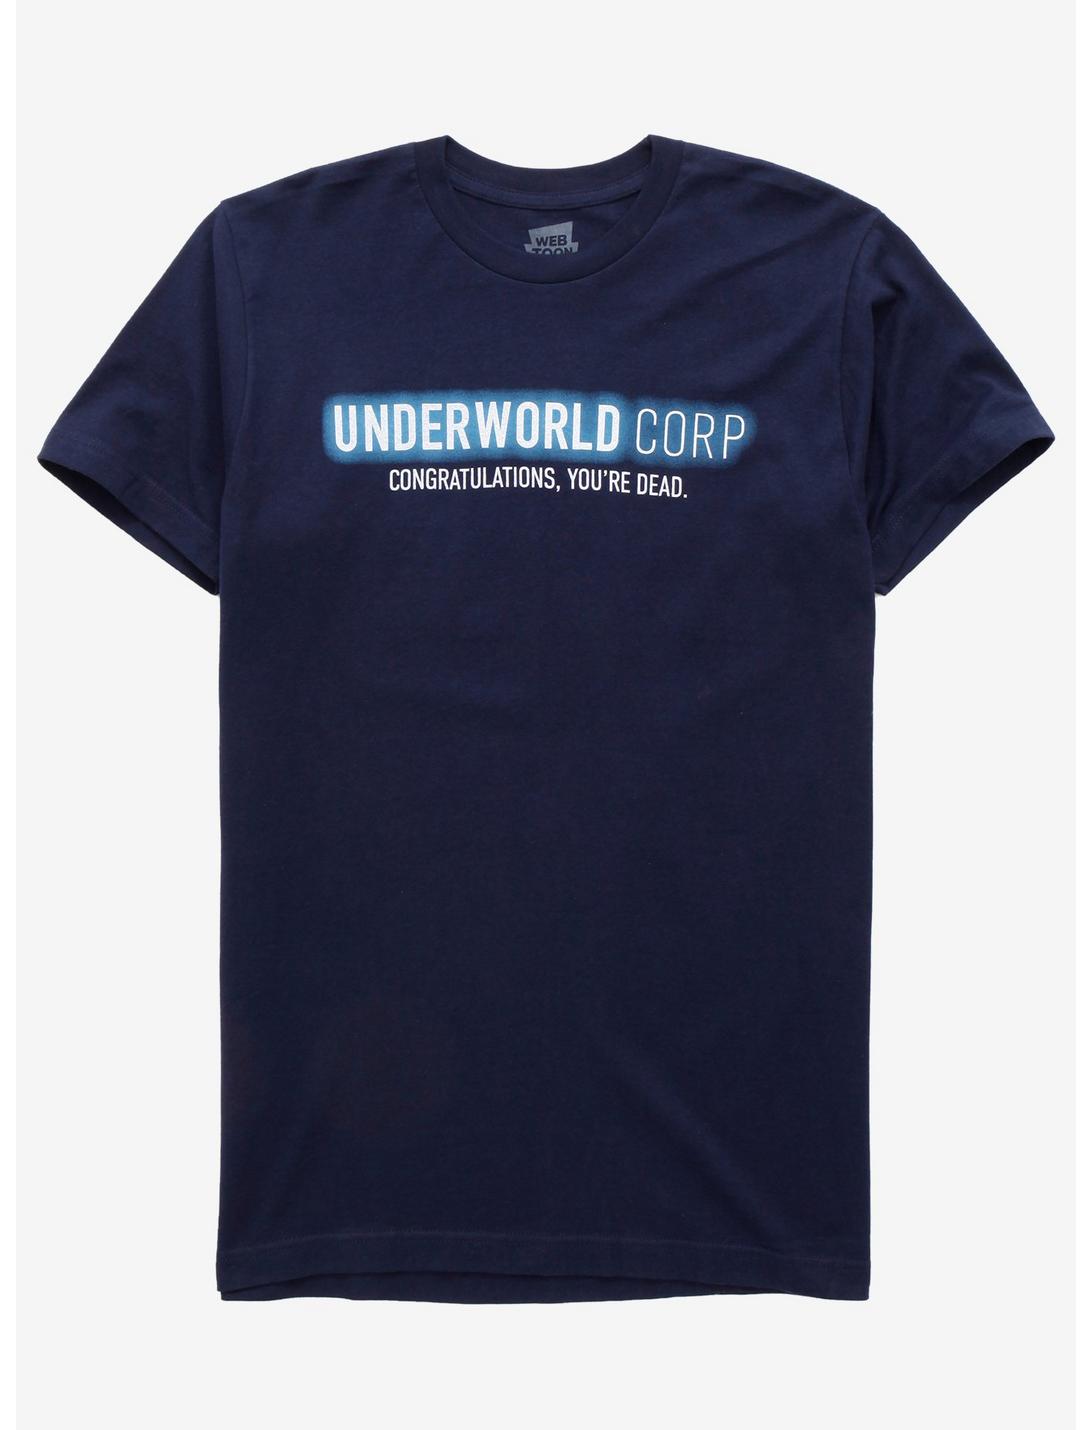 Lore Olympus Underworld Corp T-Shirt - BoxLunch Exclusive, BLACK, hi-res